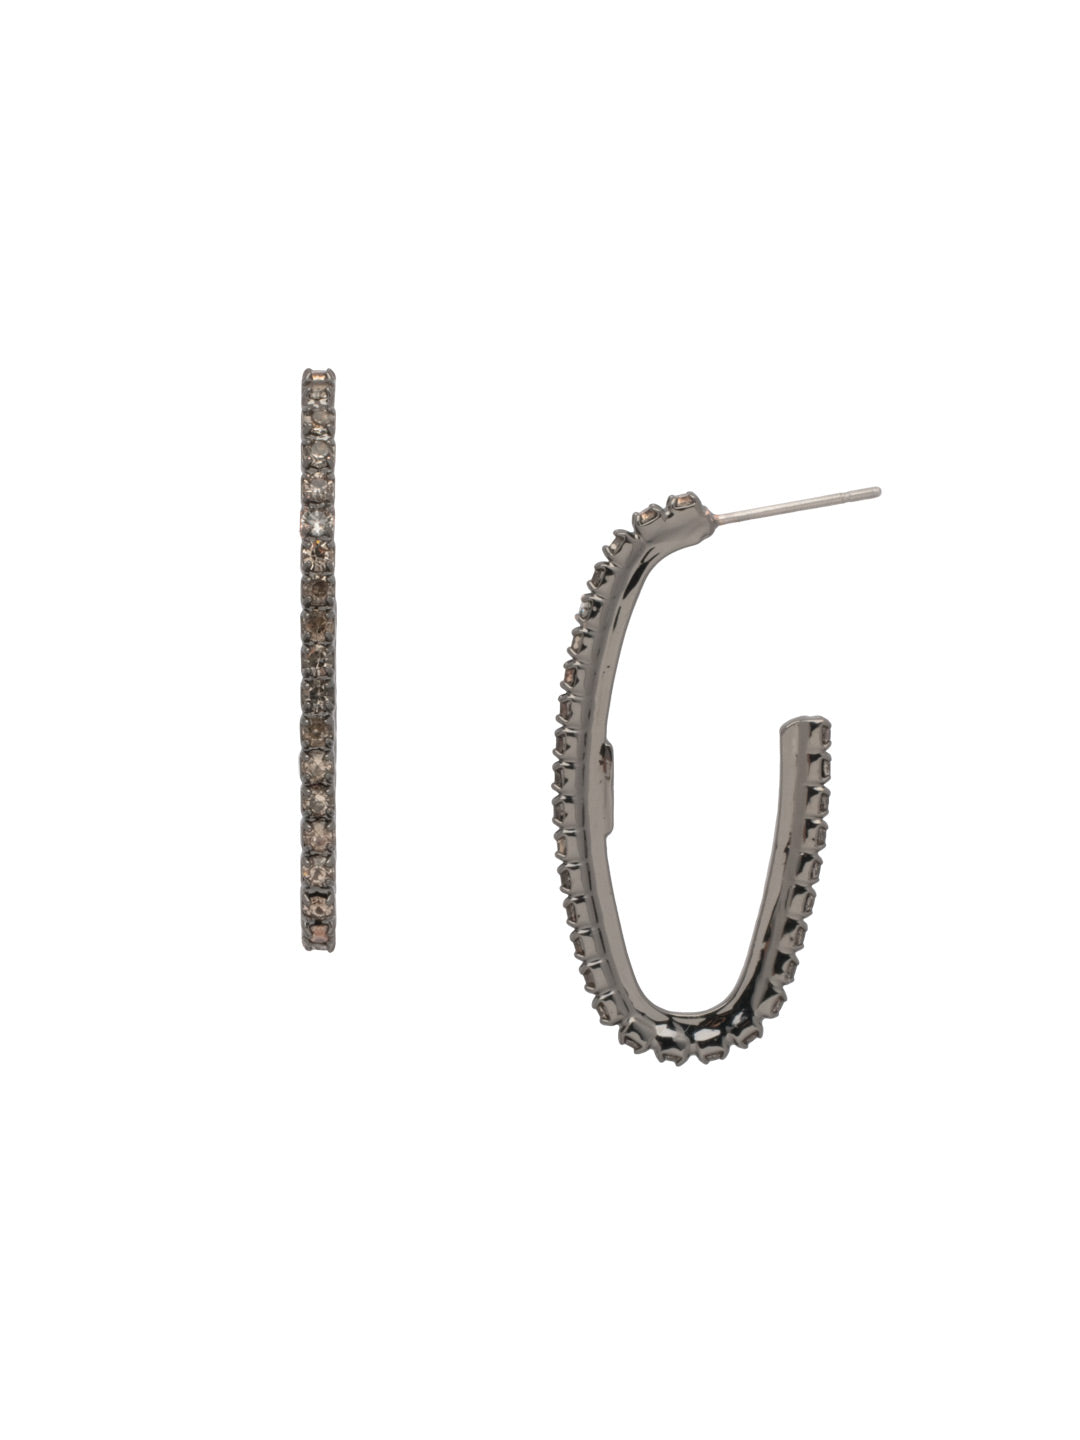 Shay Rhinestone Hoop Earrings - EFL7GMBD - <p>The Shay Rhinestone Hoop Earrings feature a rhinestone embellished open oblong hoop on a post. From Sorrelli's Black Diamond collection in our Gun Metal finish.</p>